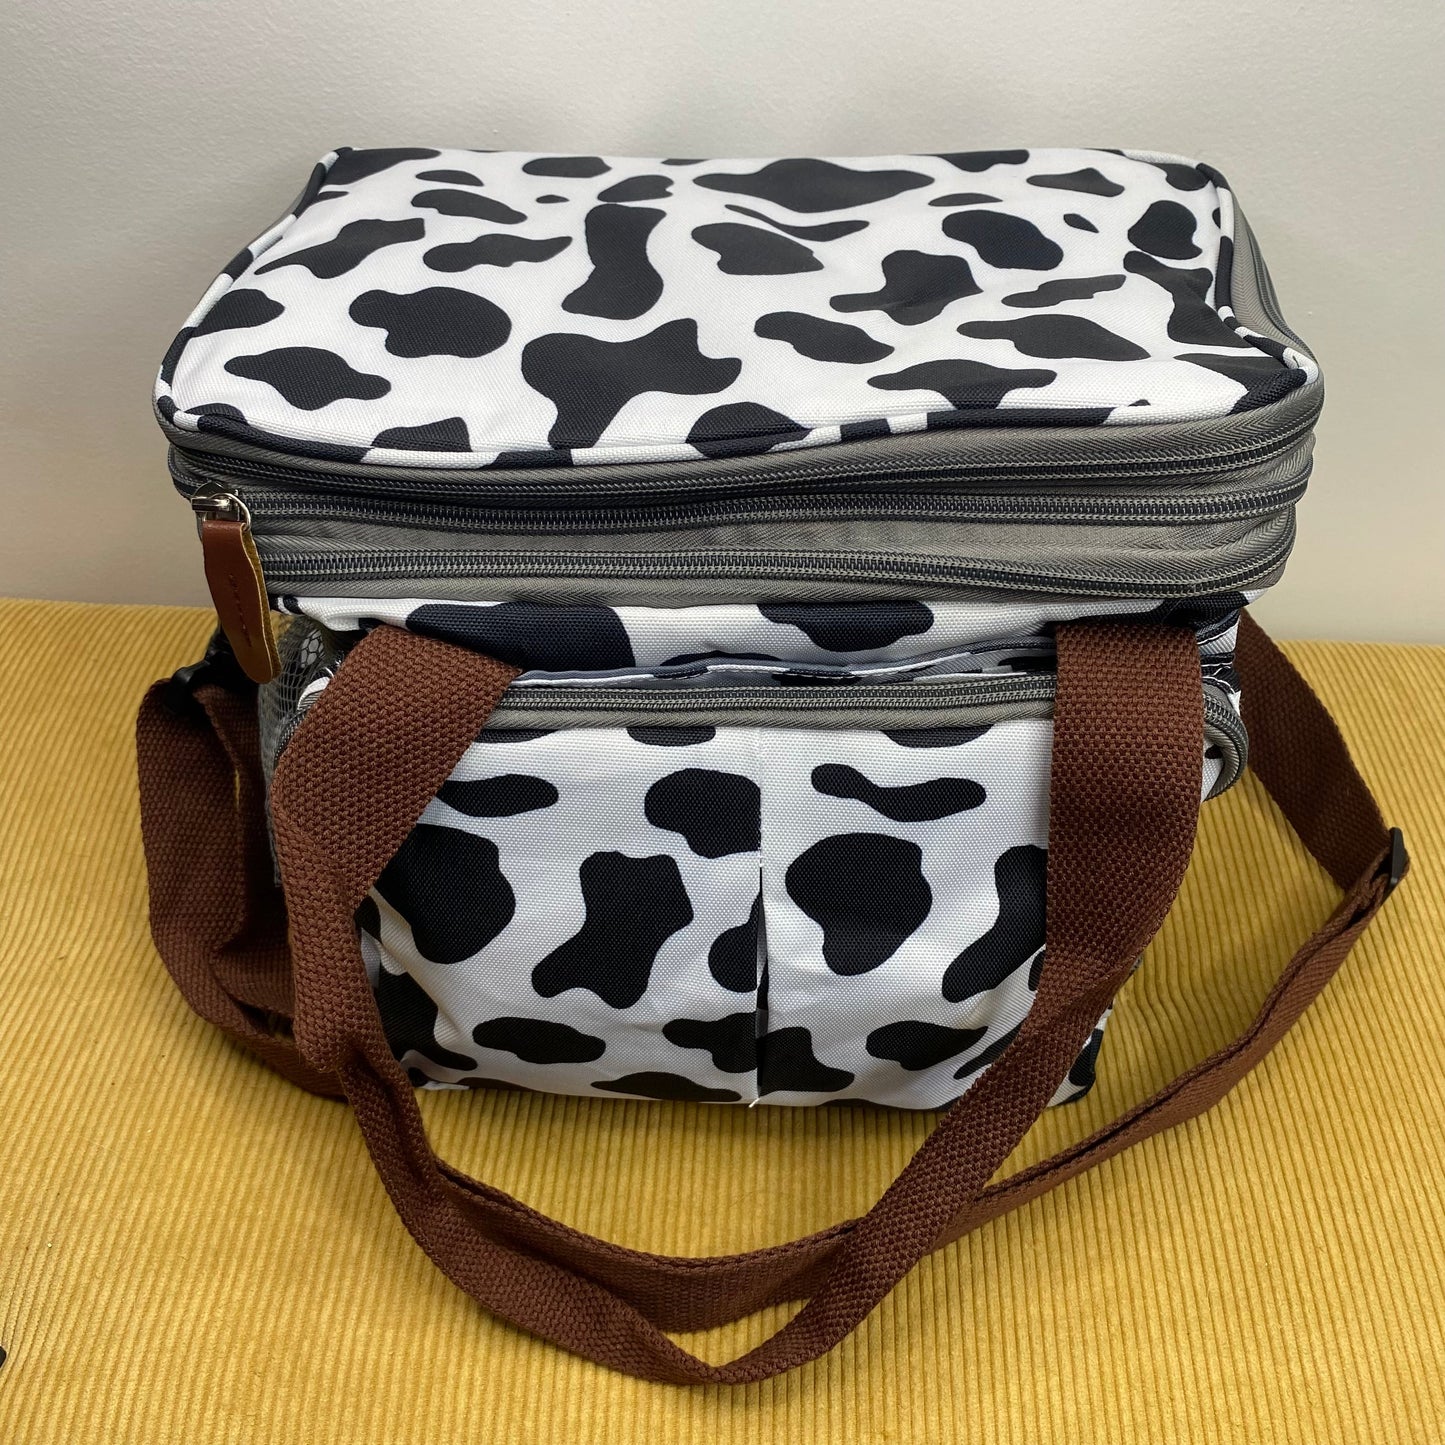 Lunch Box Cooler - Cow